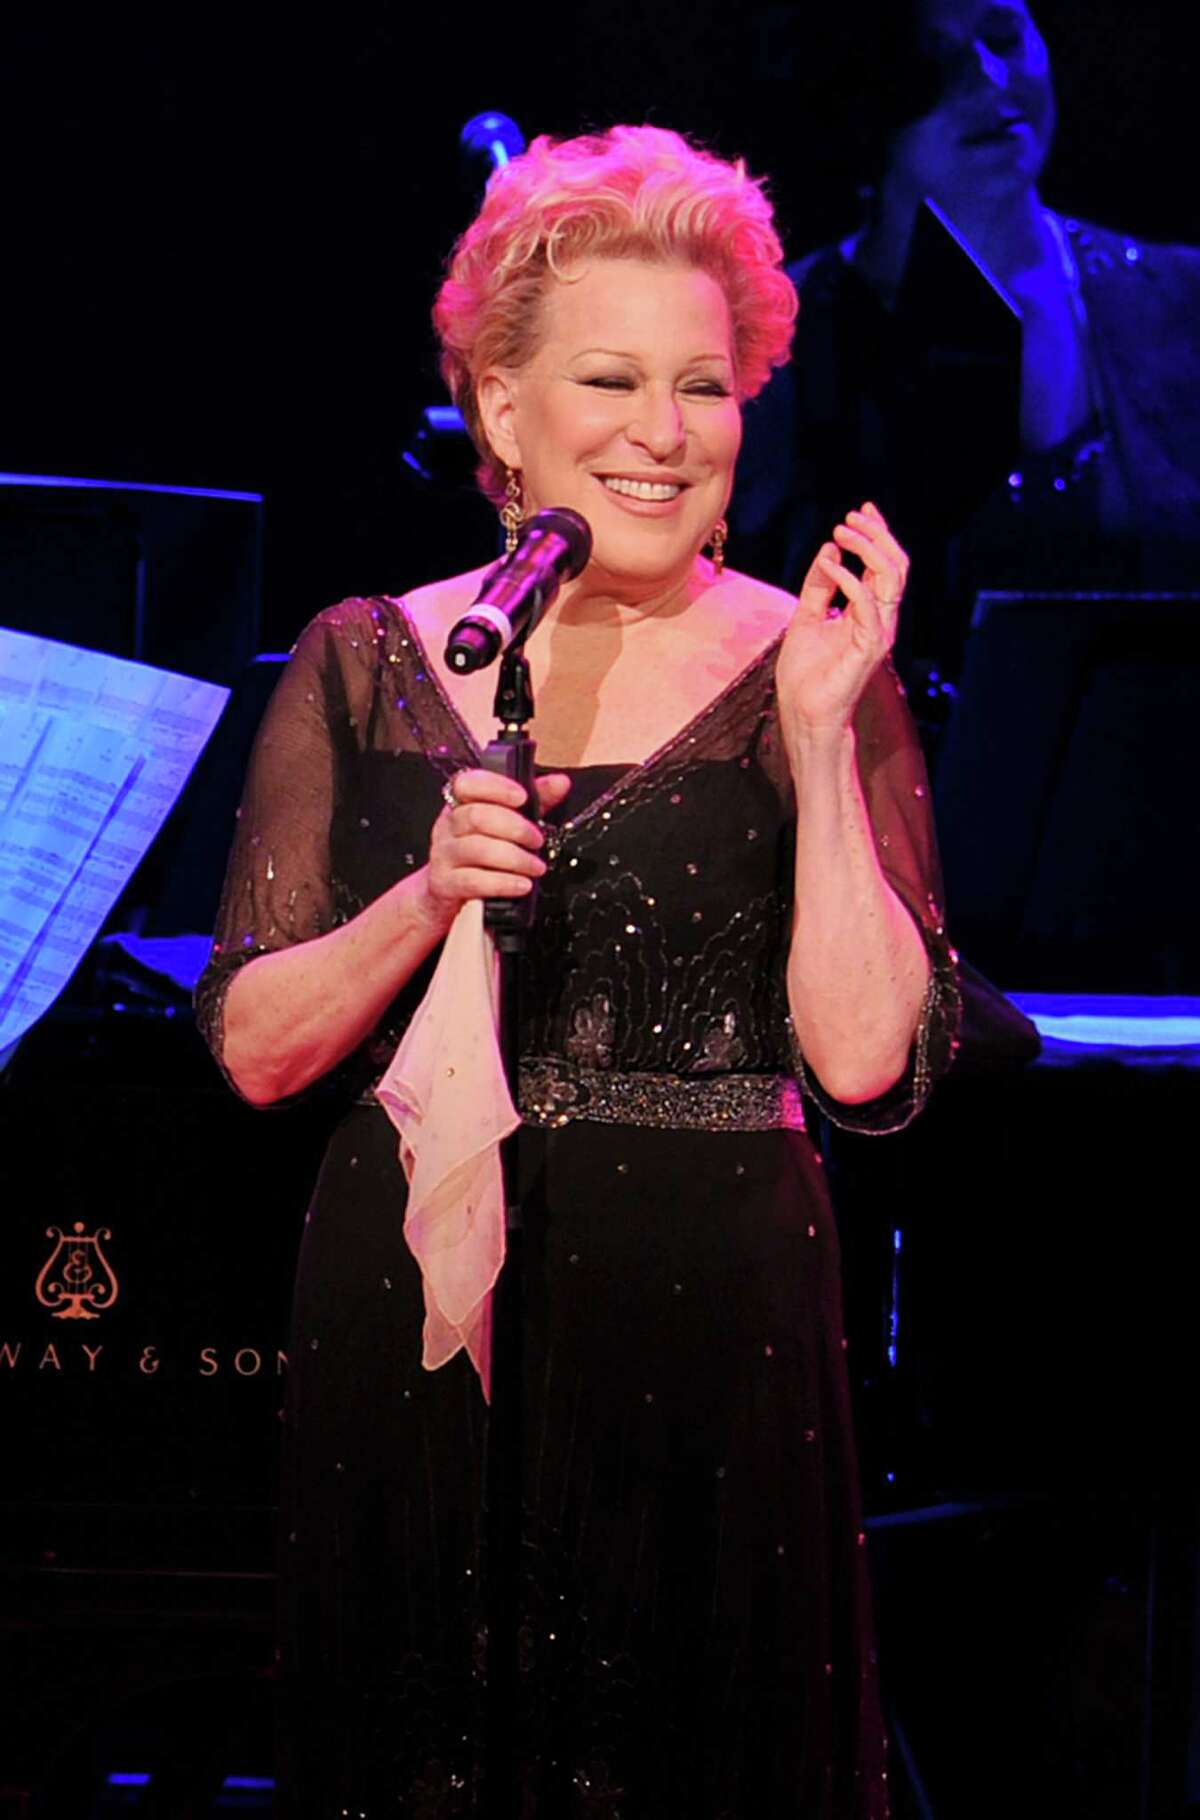 Singer Bette Midler performs onstage at the 120th Anniversary of Carnegie Hall on April 12, 2011 in New York City.